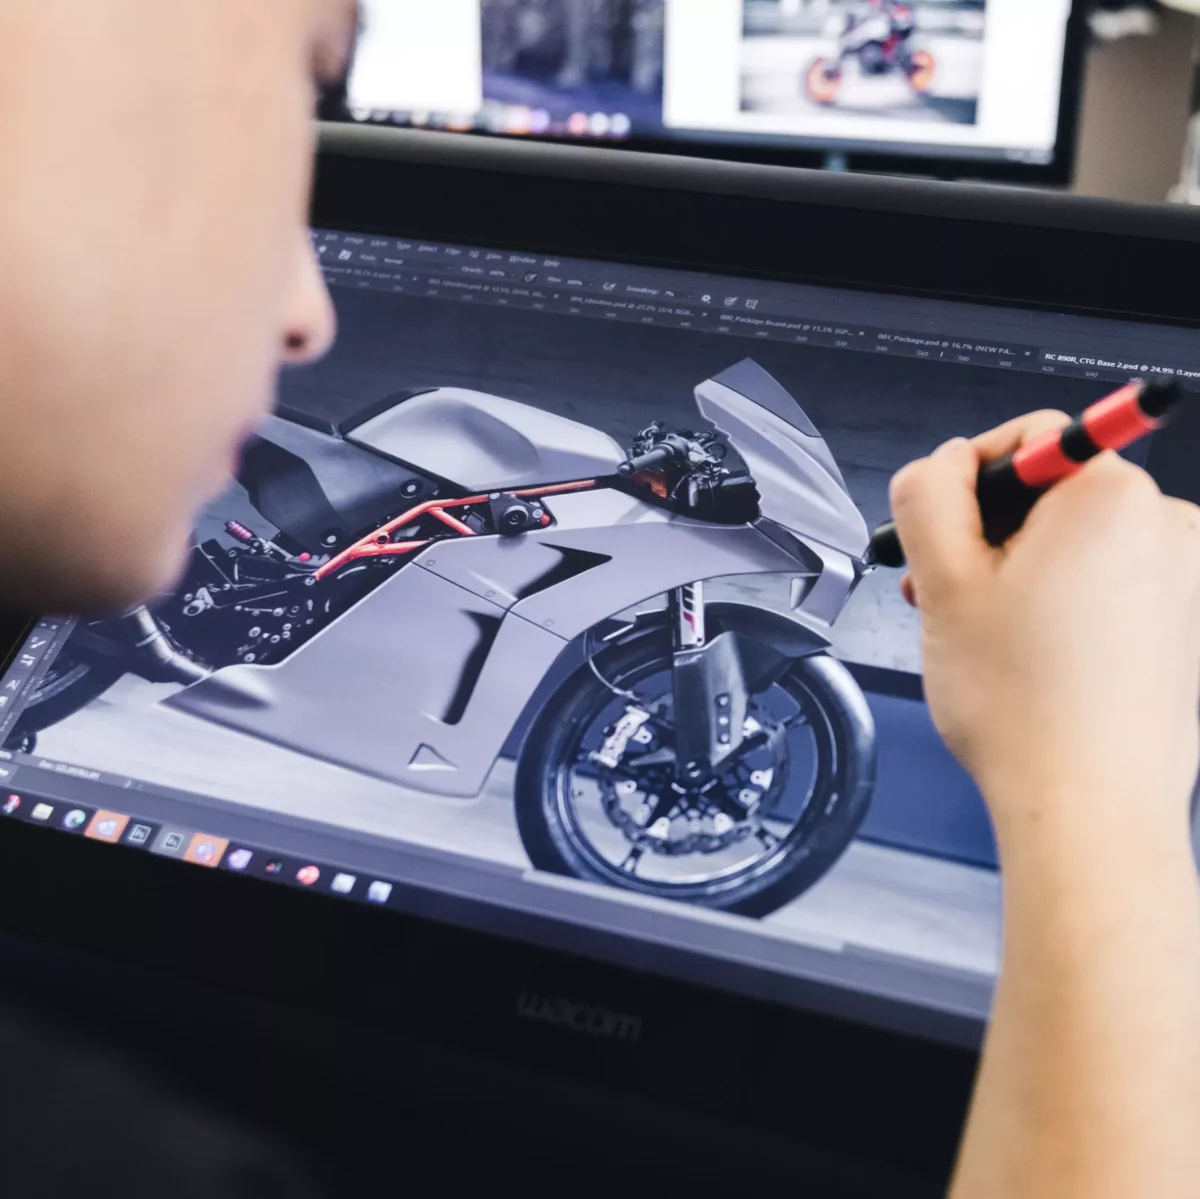 Gil Deltreul Gervais sketching the KTM RC 8c in square crop